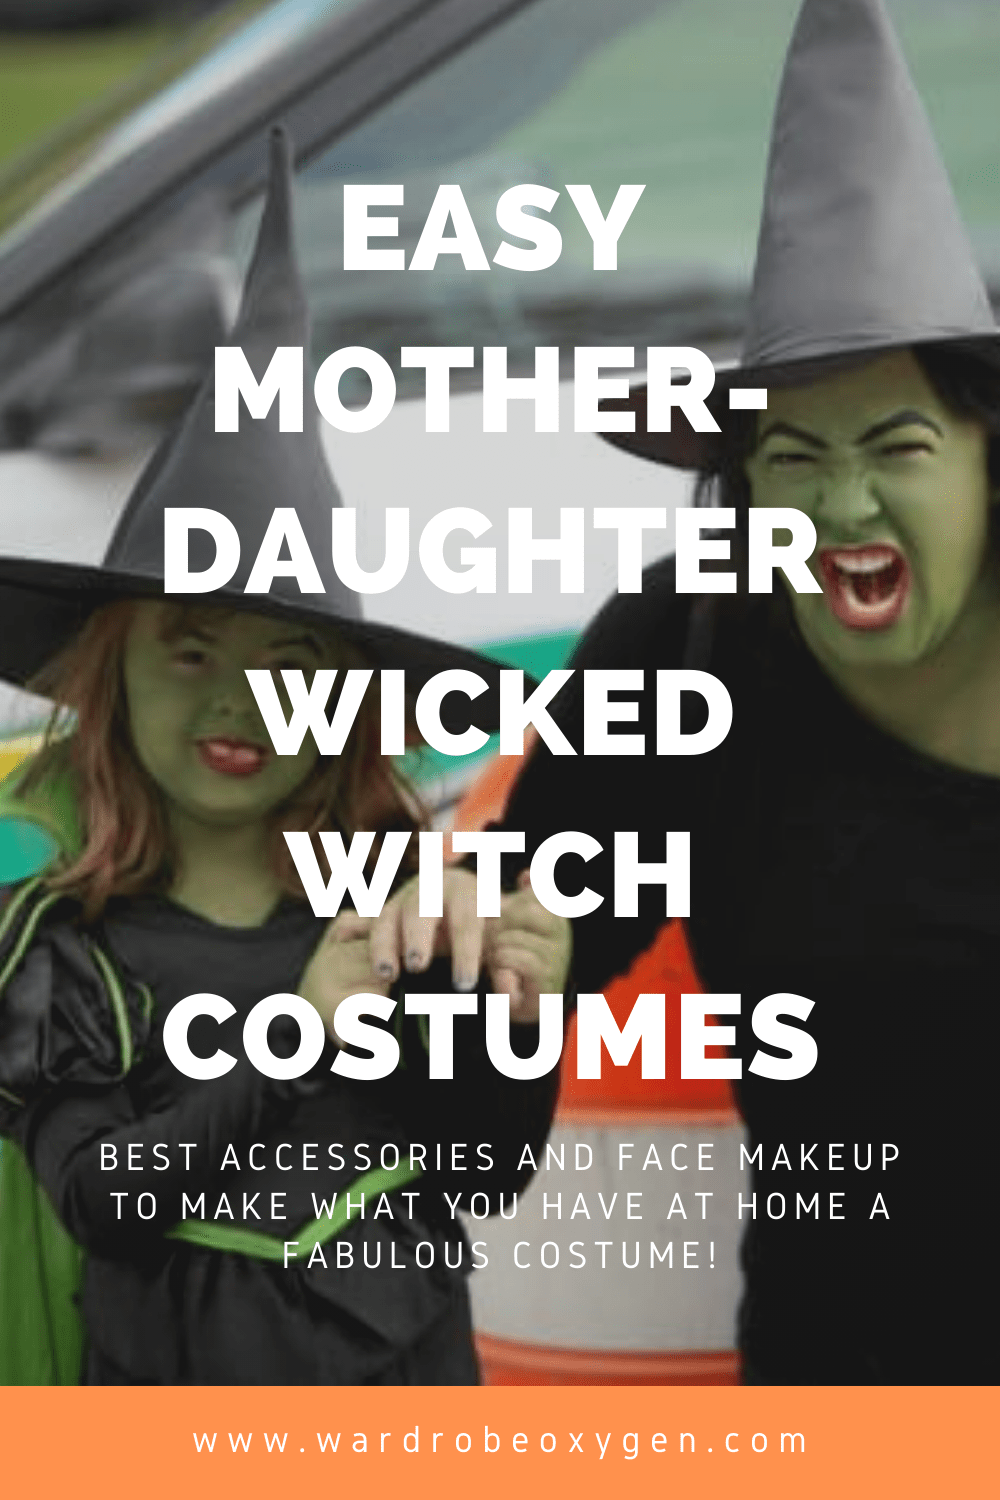 Mother-Daughter Wicked Witch Costumes for Halloween